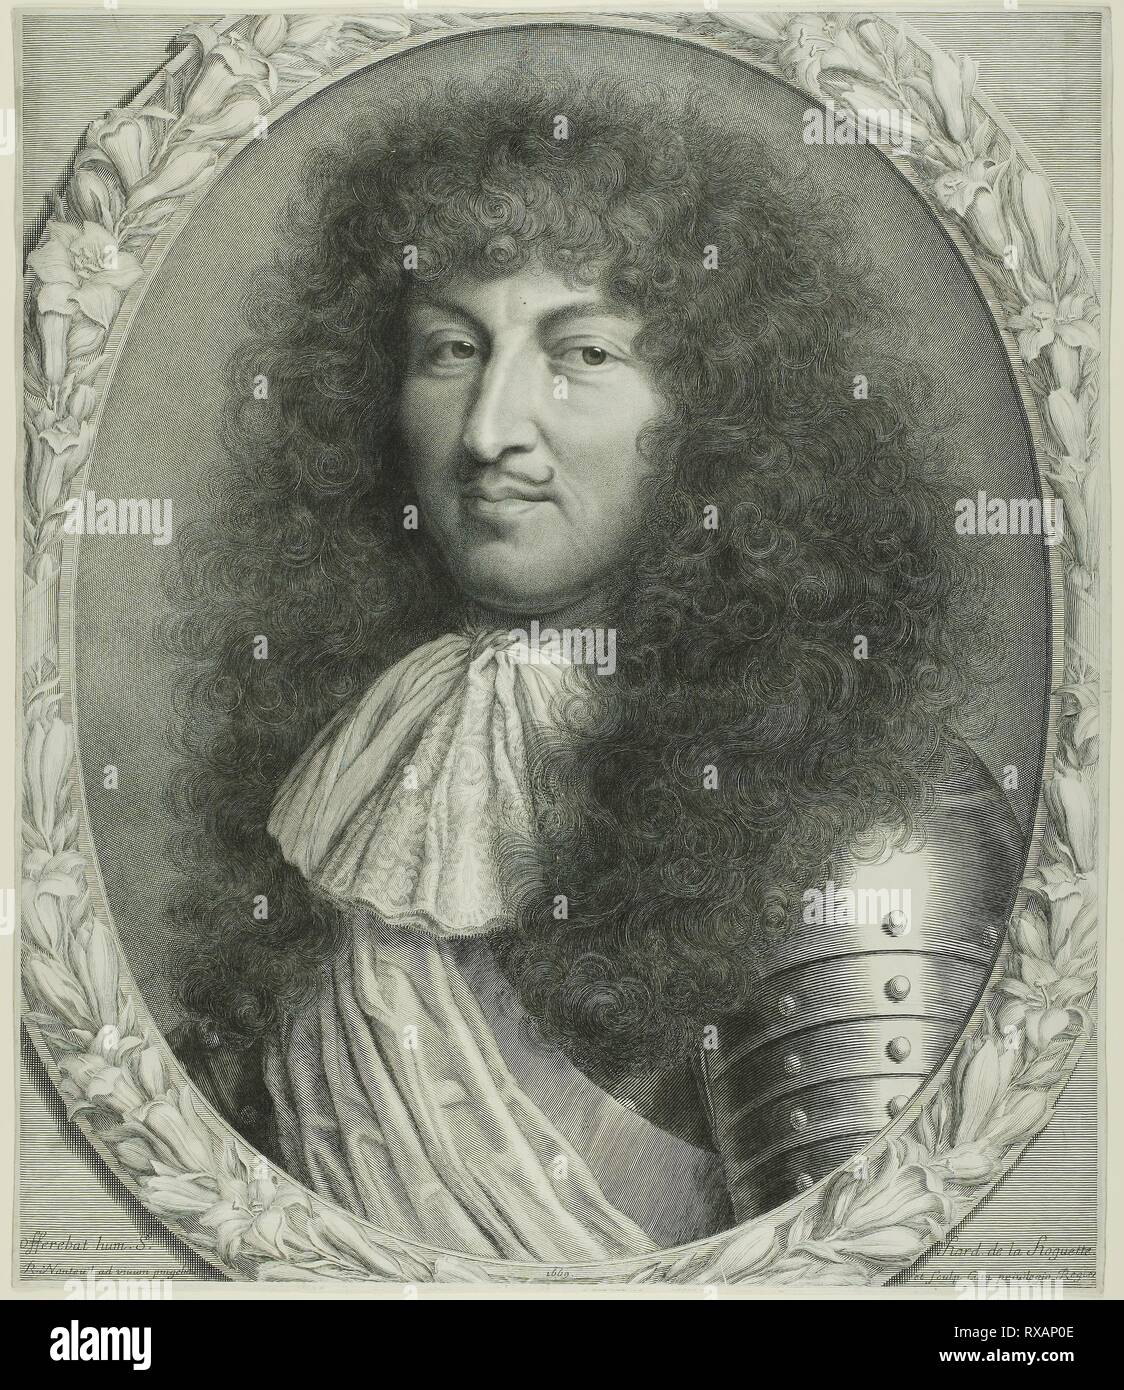 Louis XIV. Robert Nanteuil; French, 1623-1678. Date: 1669. Dimensions: 498 × 422 mm (image); 502 × 427 mm (plate/sheet). Engraving in black on paper. Origin: France. Museum: The Chicago Art Institute. Stock Photo